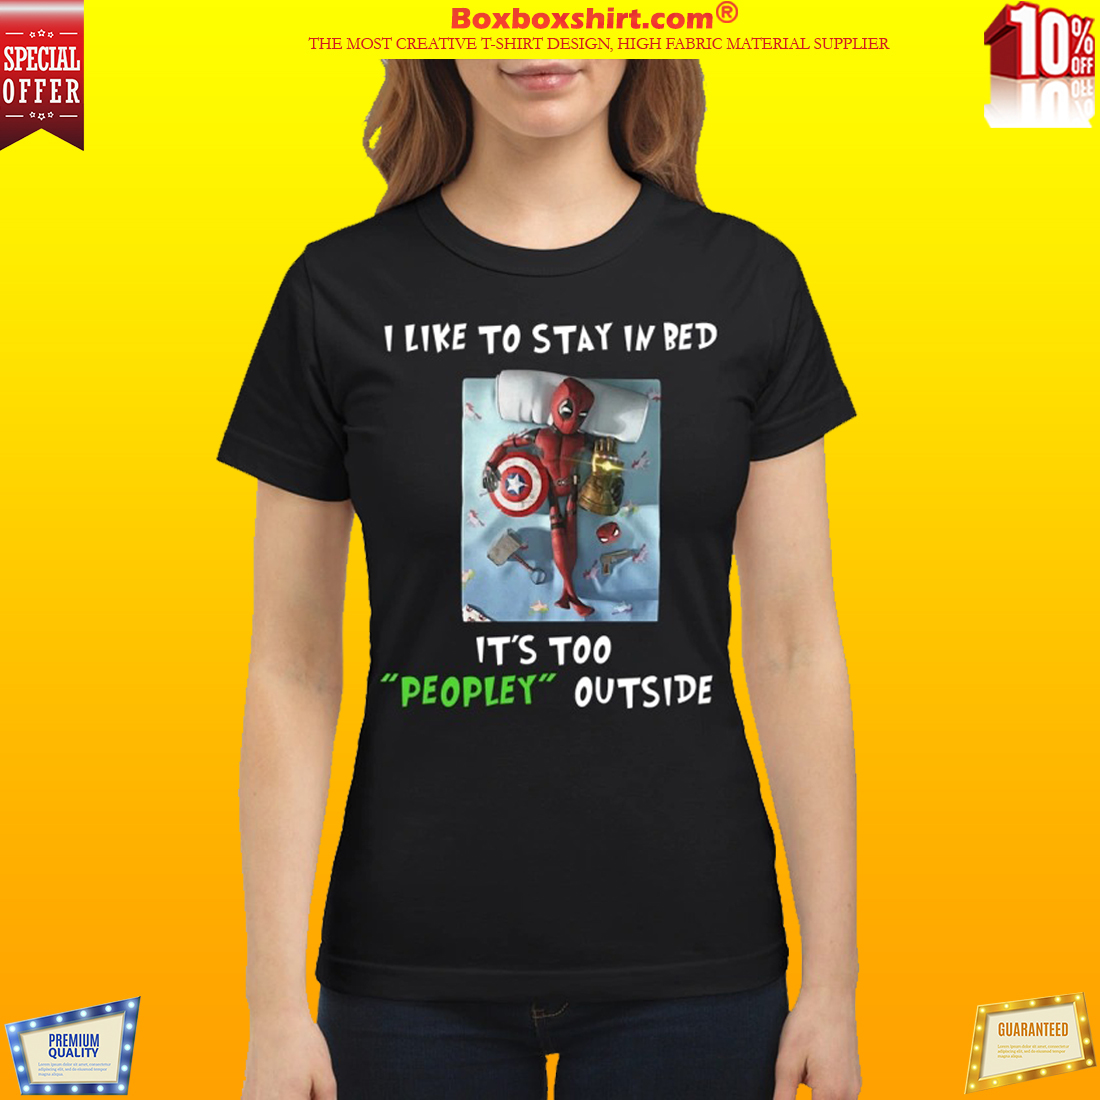 Deadpool I like to stay in bed it too peopley outside classic shirt